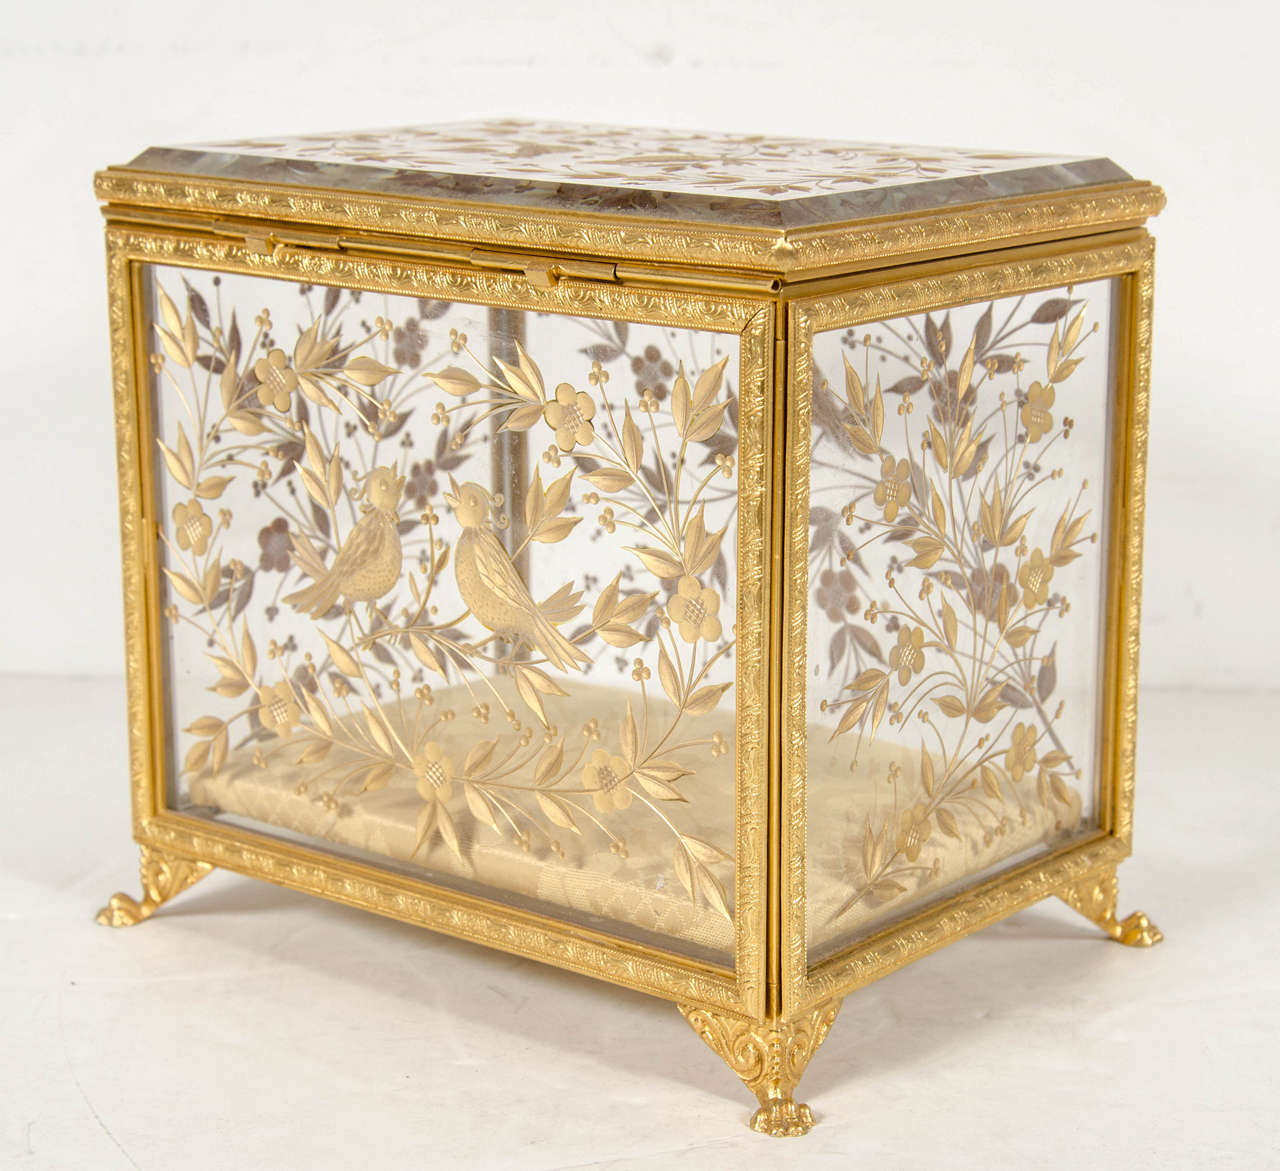 Exquisite French Empire Bronze Ormolu Mounted Crystal Box 2